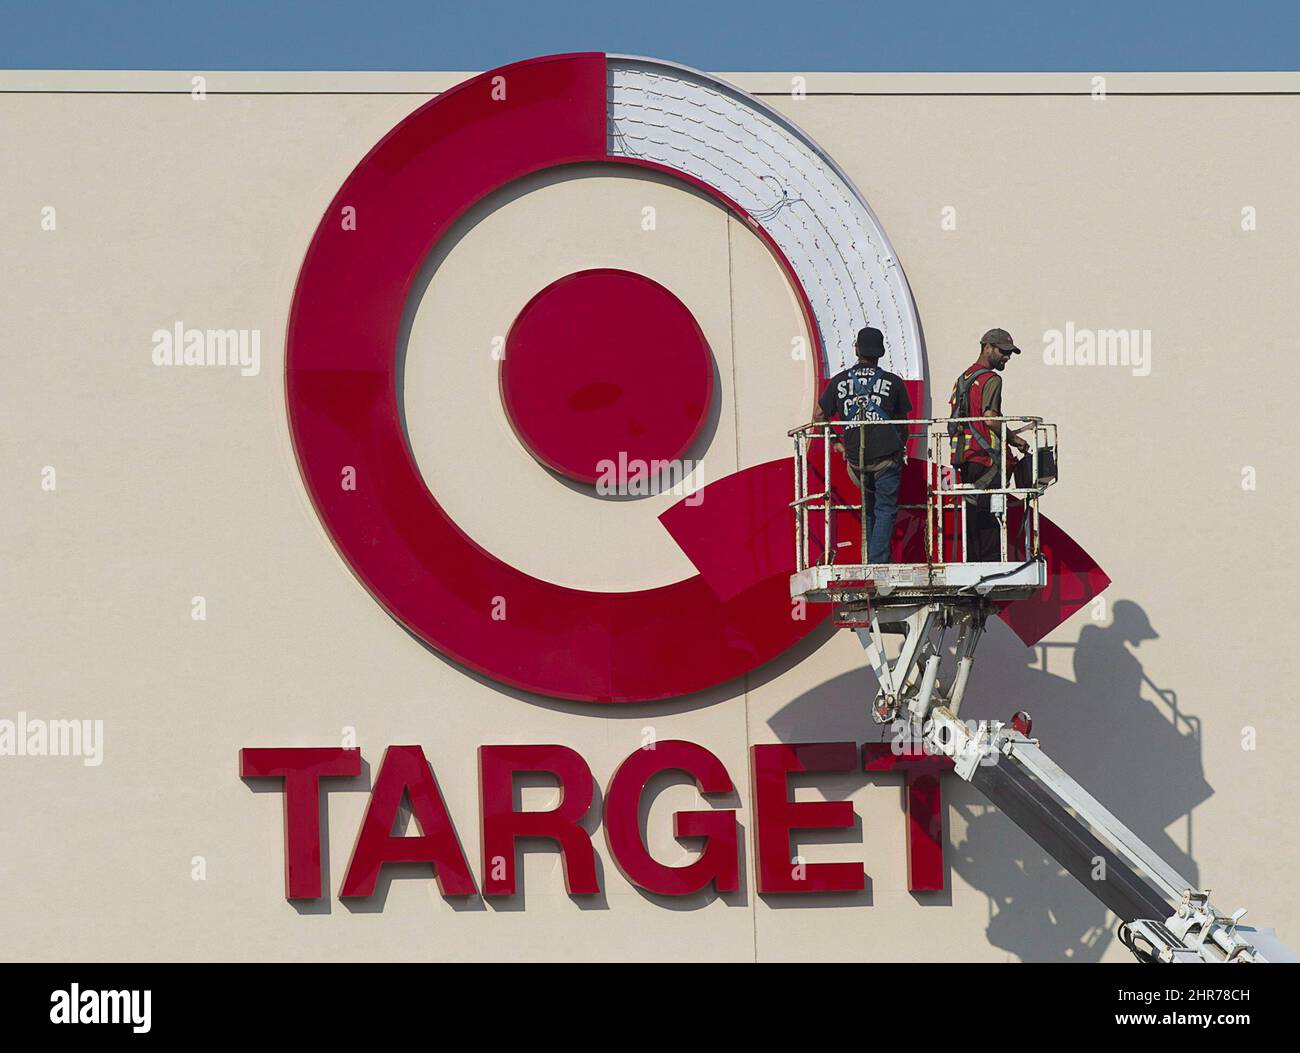 Workers install an outdoor sign at the new Target store at the Mic Mac Mall  in Dartmouth, N.S. on July 20, 2013. Target says it will discontinue  operating stores in Canada. It